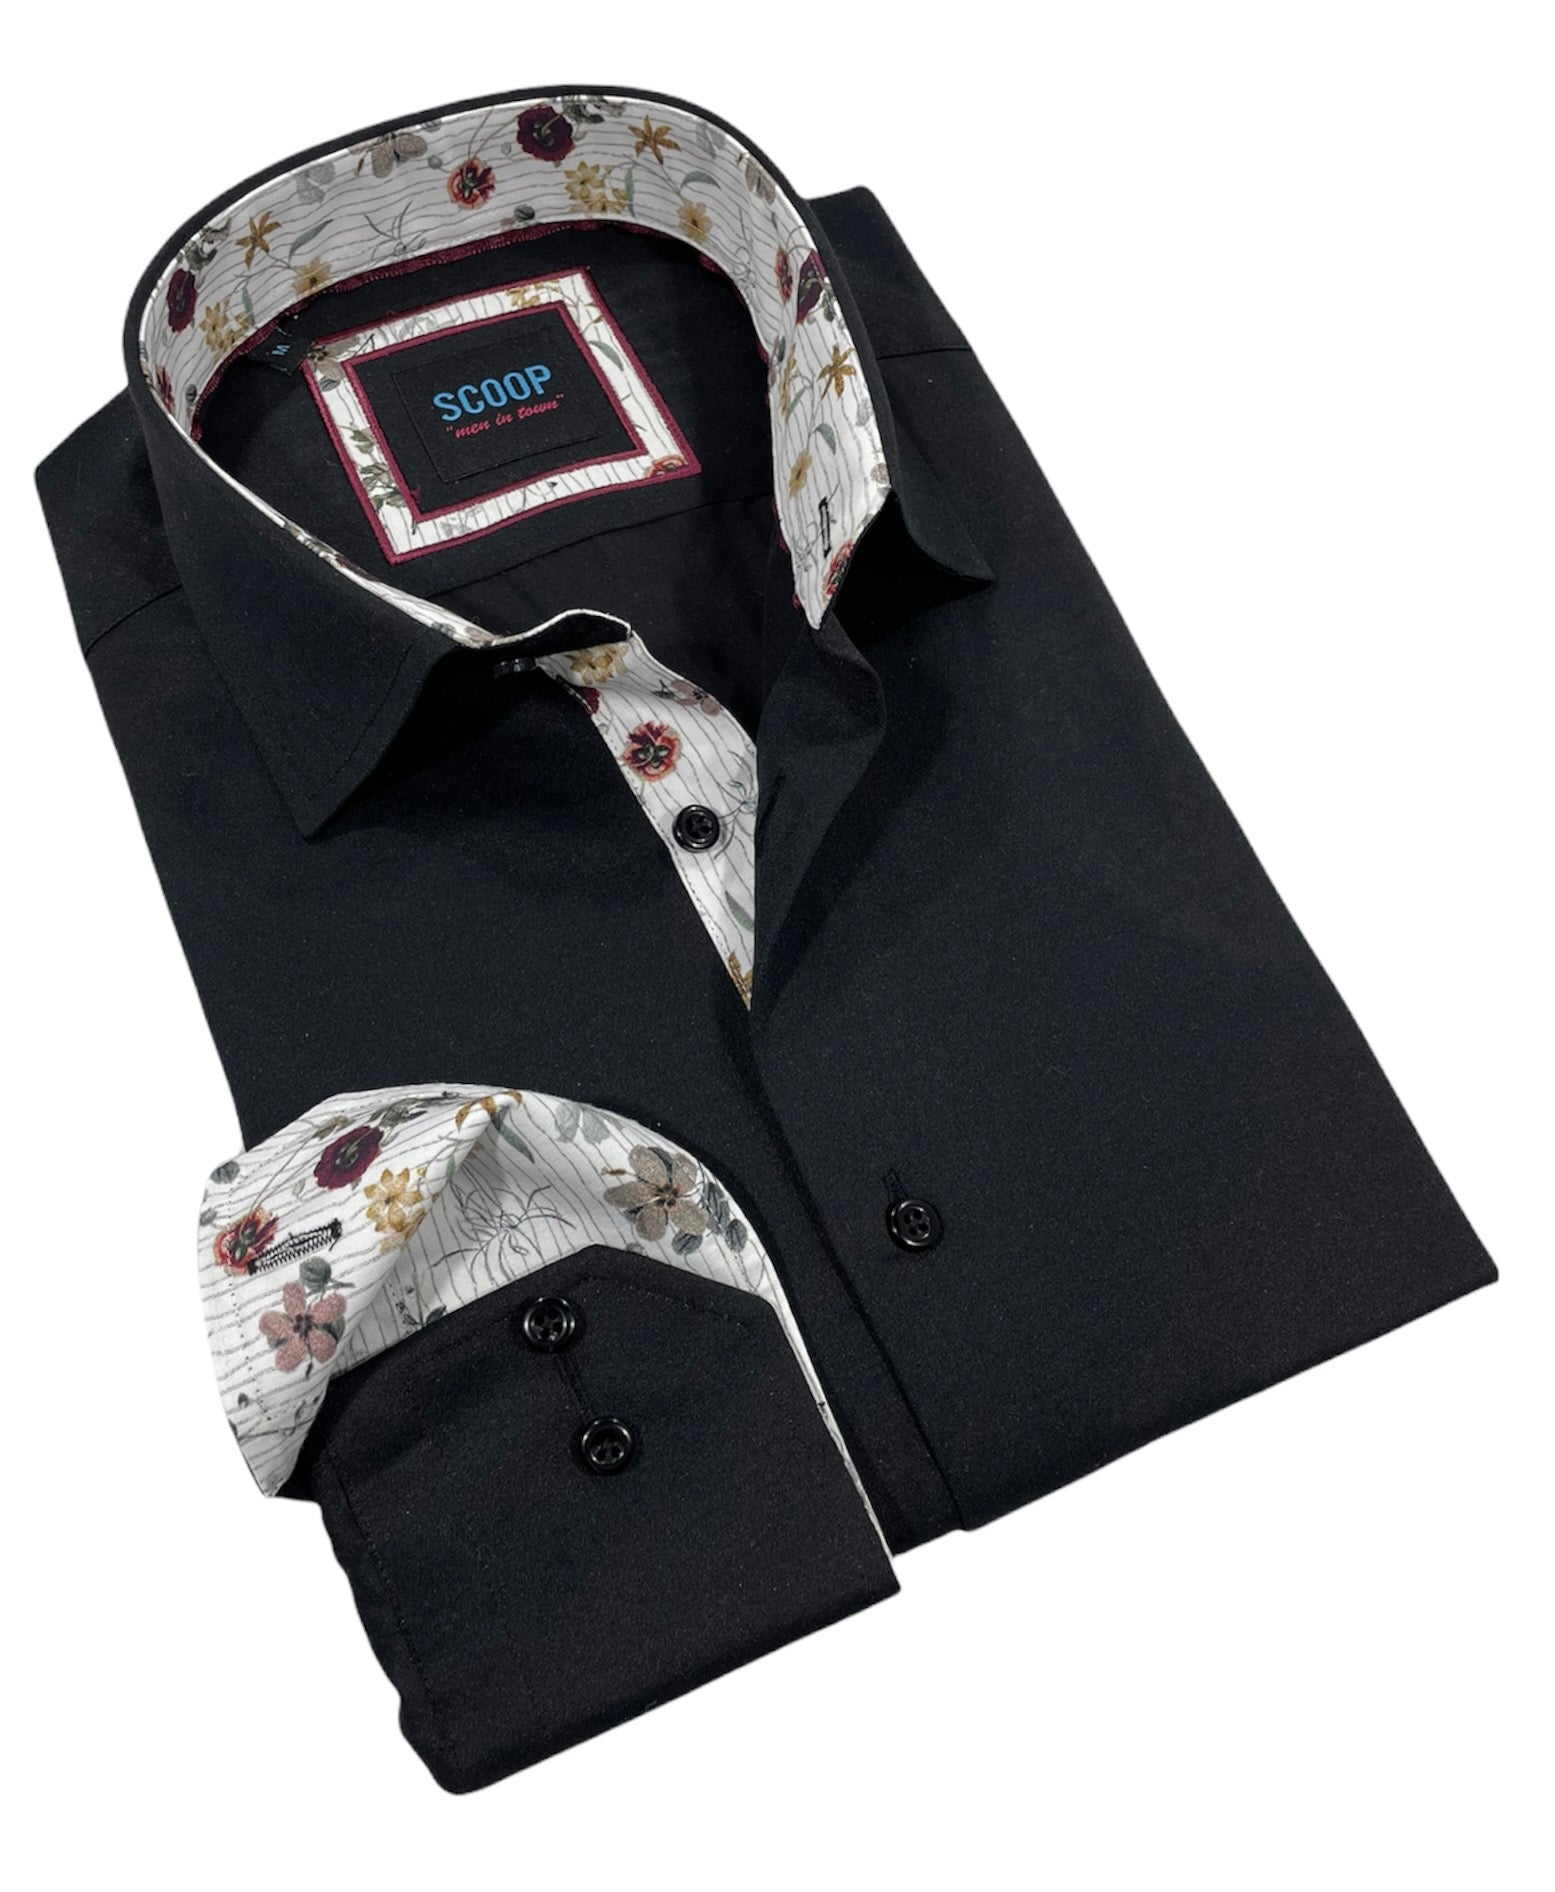 This convertible black dress shirt from Scoop is as versatile as a men's top can get. Buttoned up with a tie, this shirt becomes an essential, plain black dress shirt that can be worn with a slim black or grey suit.